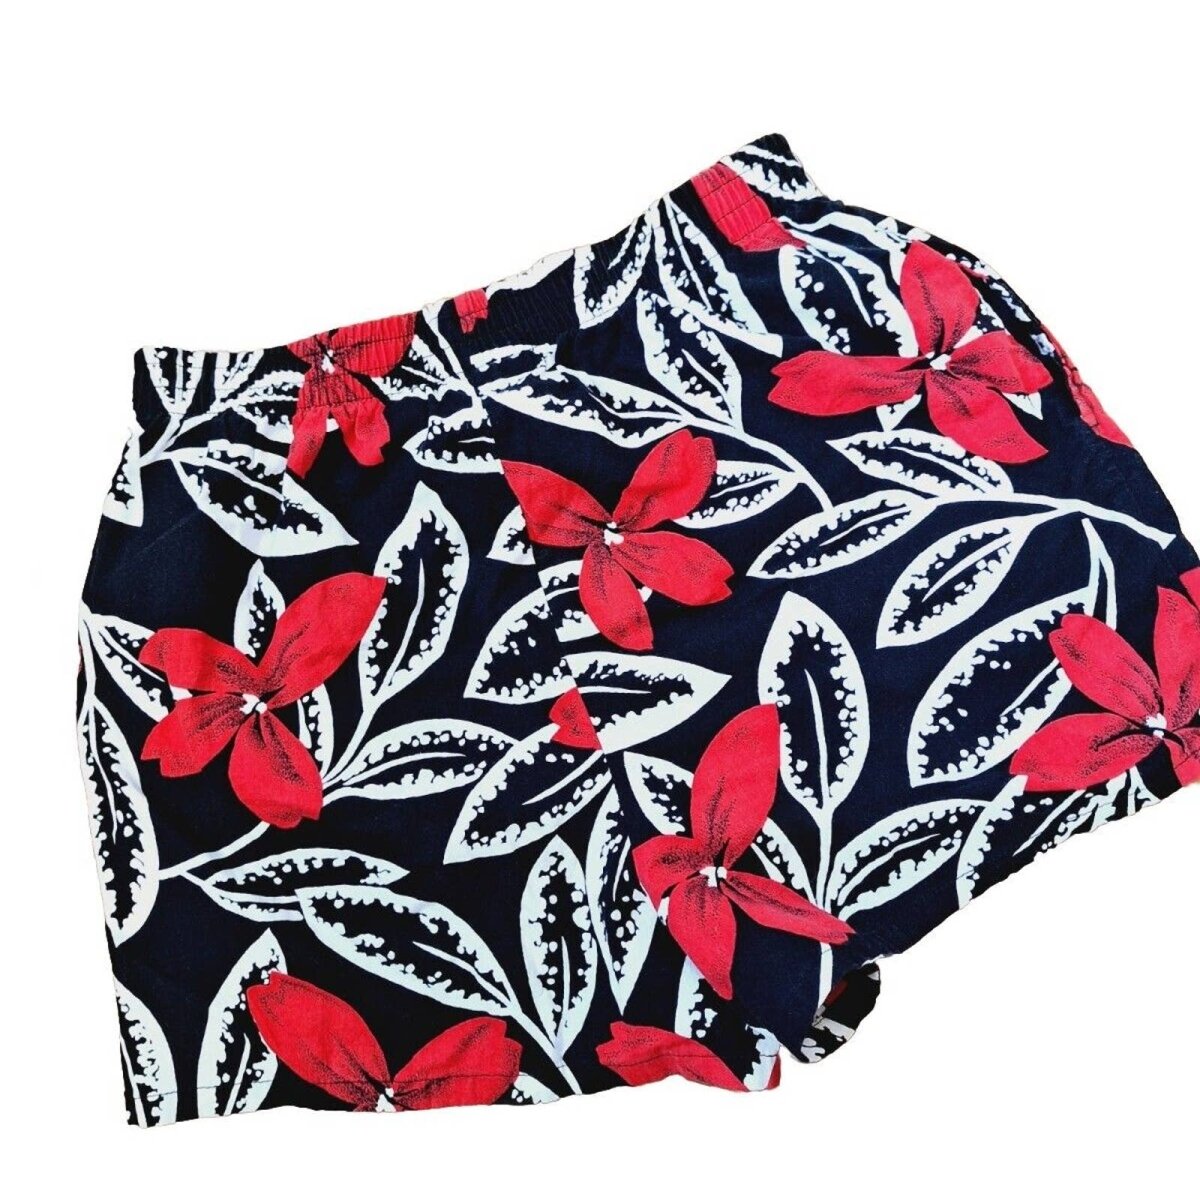 Vintage 80s/90s Black Red Floral Shorts Size Medium - themallvintage The Mall Vintage